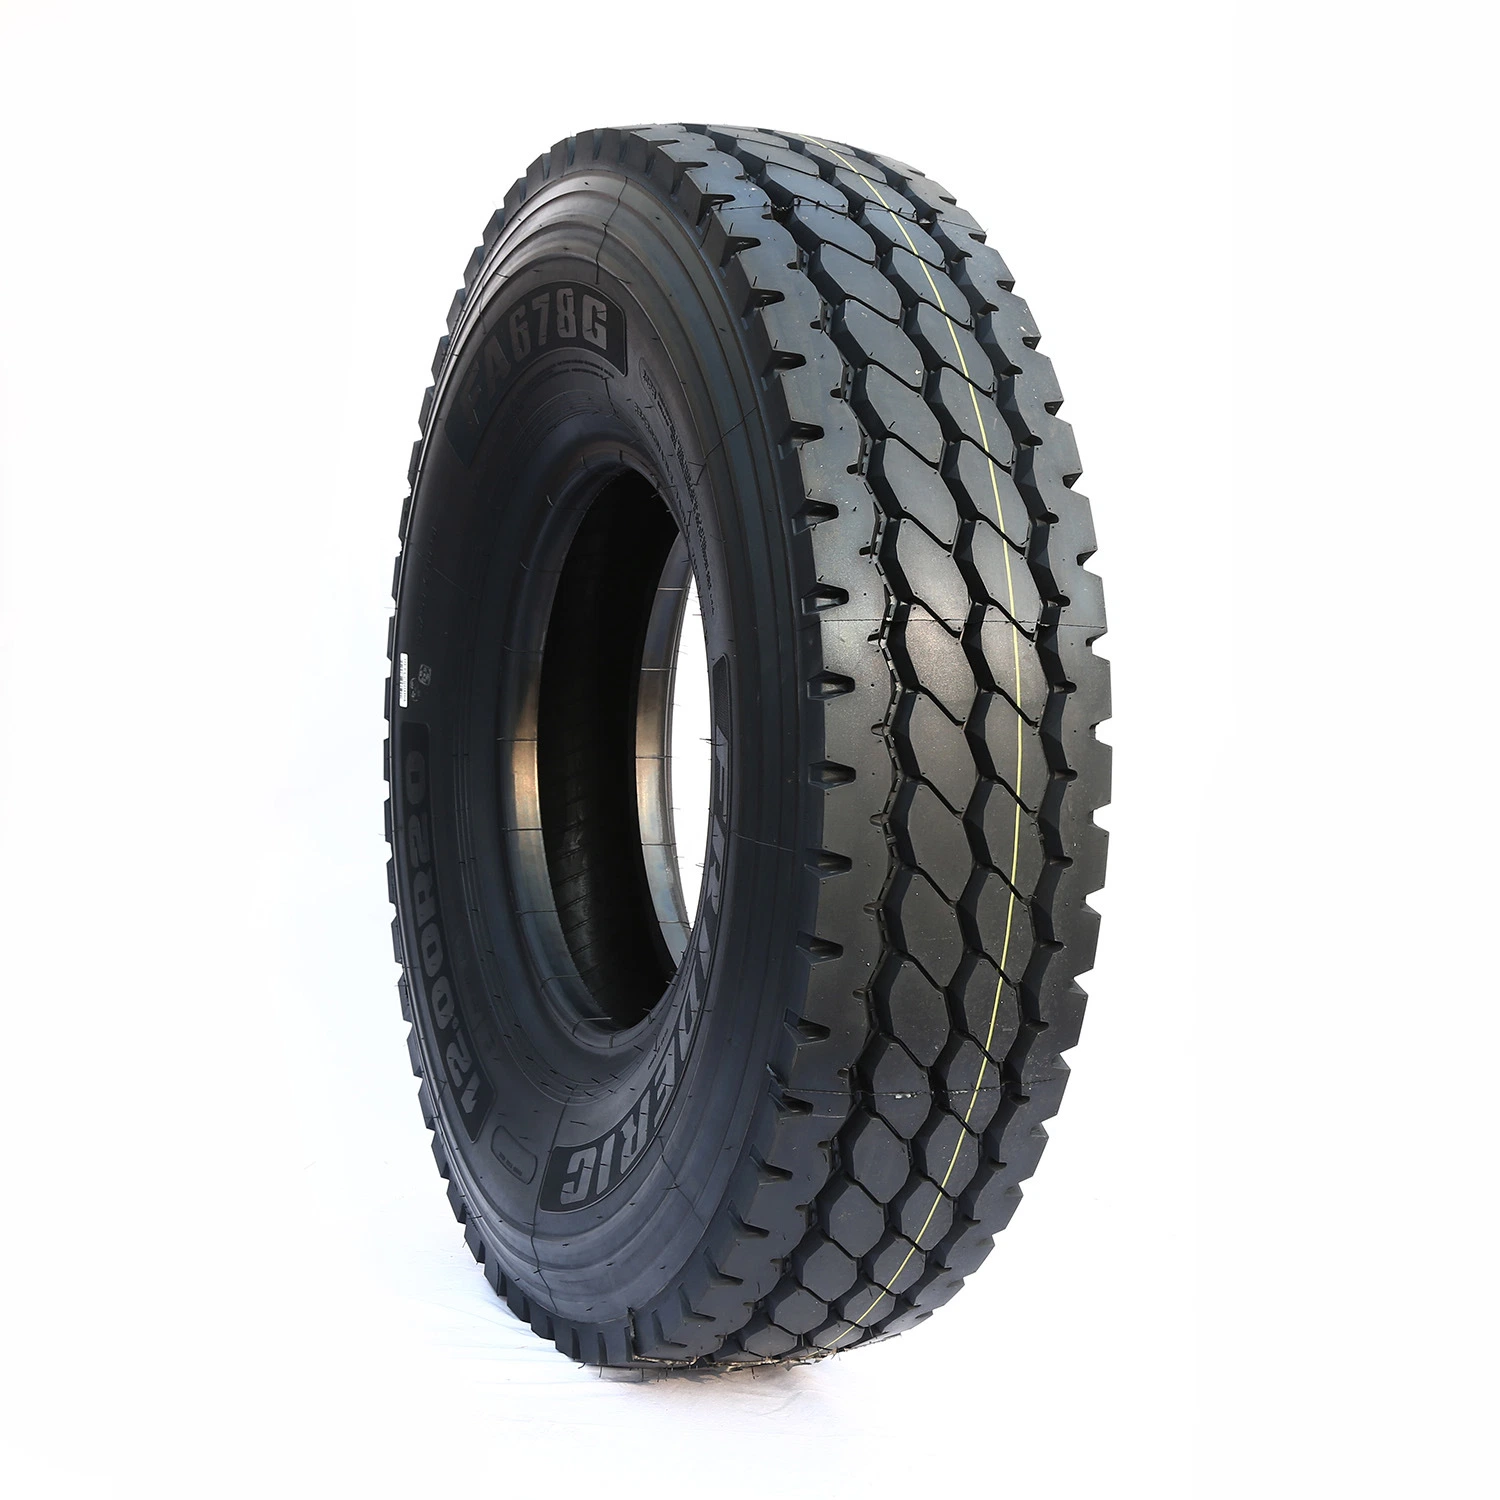 Wholesale Cheap Price 12.00r20 Truck Bus Tires 20pr Chinese All Steel Radial Truck Tyres/Tires